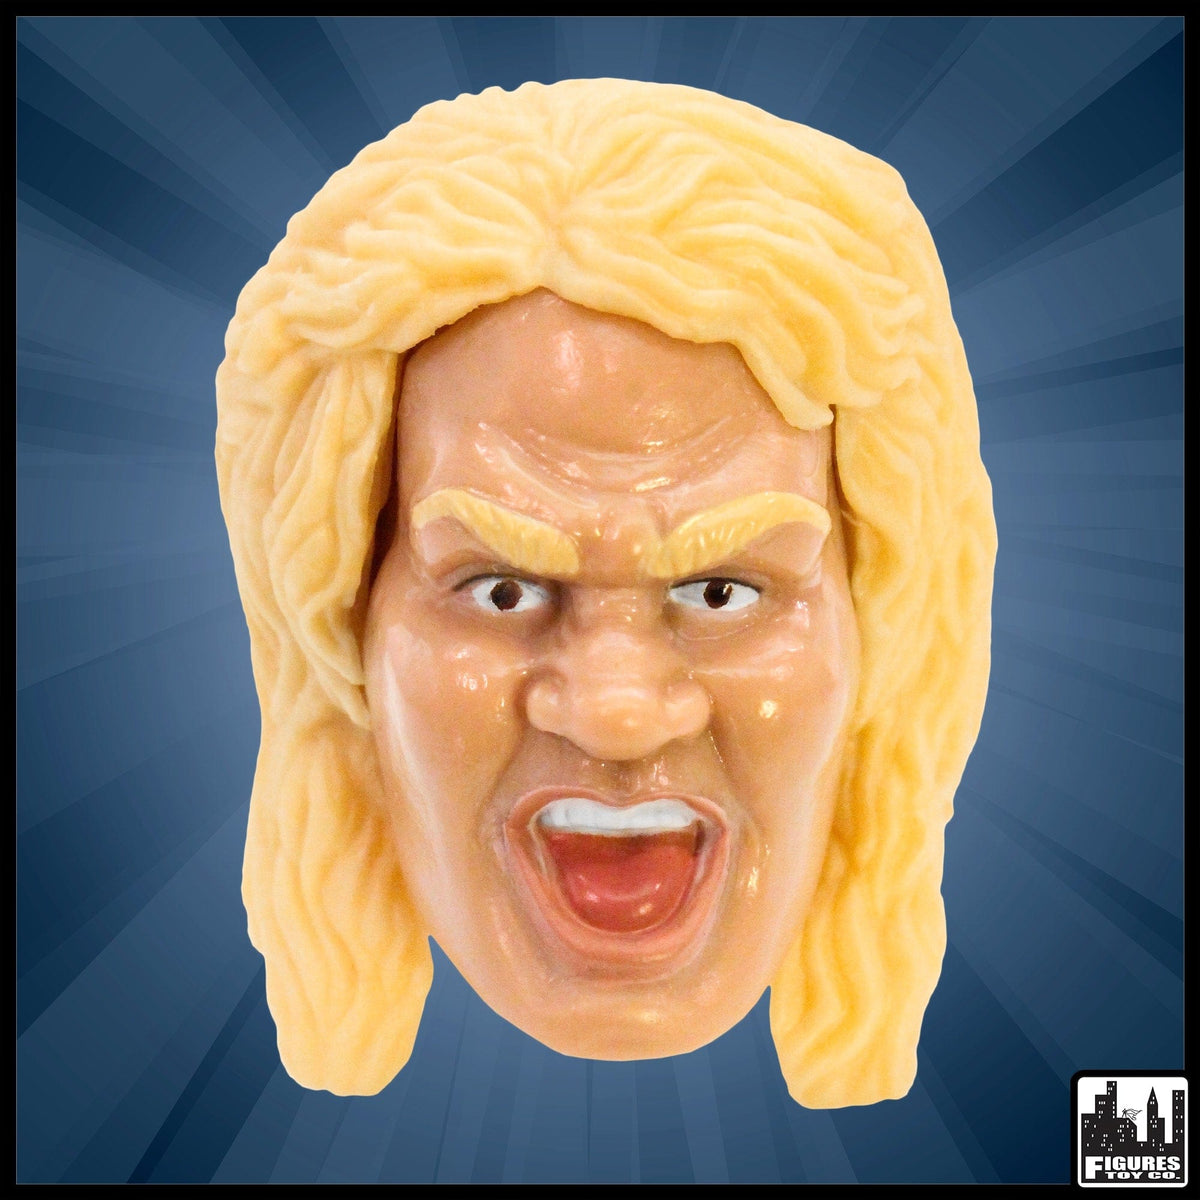 White Male Interchangeable Wrestling Action Figure Head With Long Blonde Hair